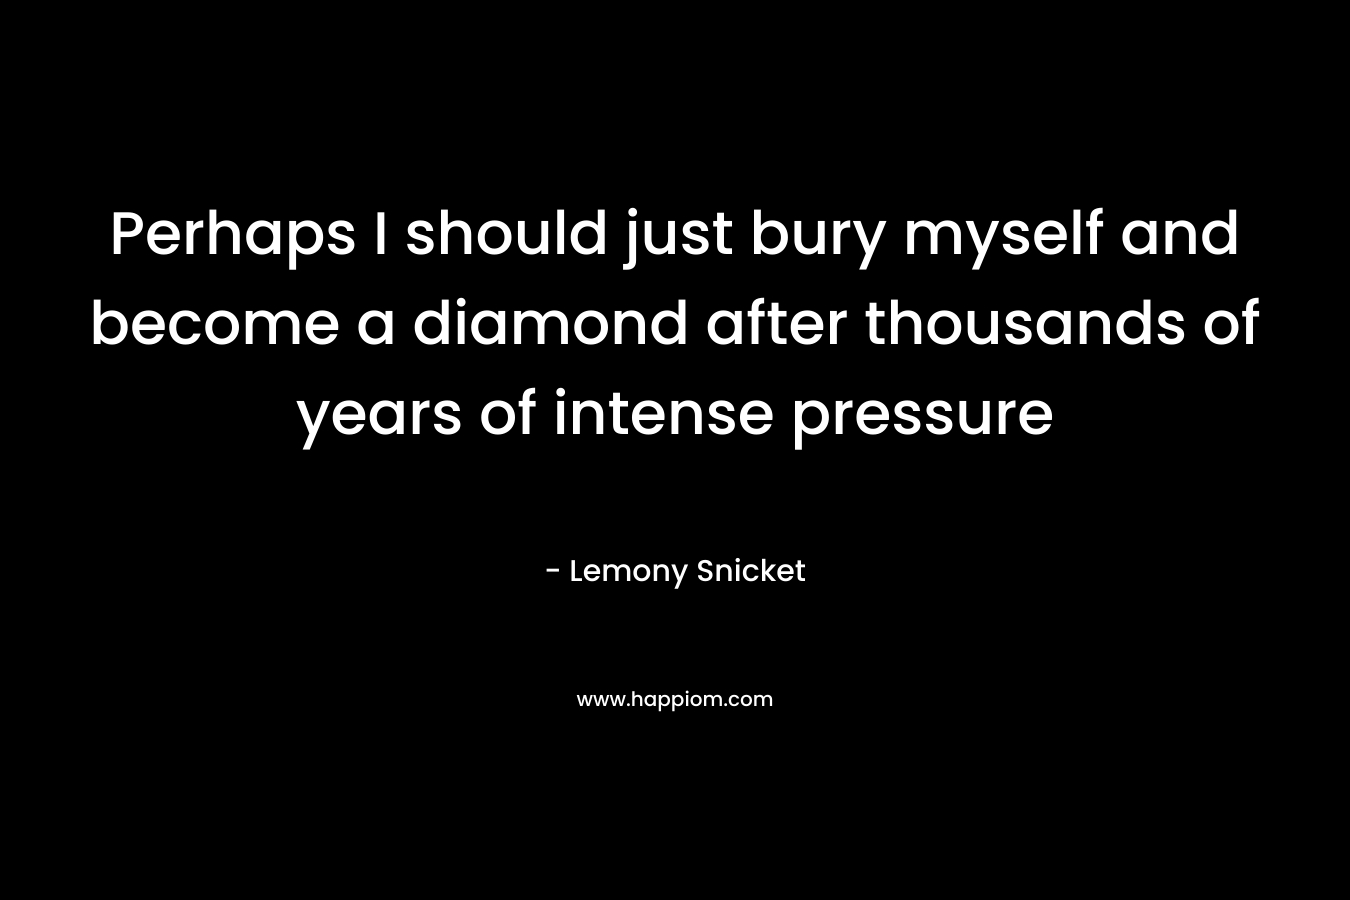 Perhaps I should just bury myself and become a diamond after thousands of years of intense pressure – Lemony Snicket